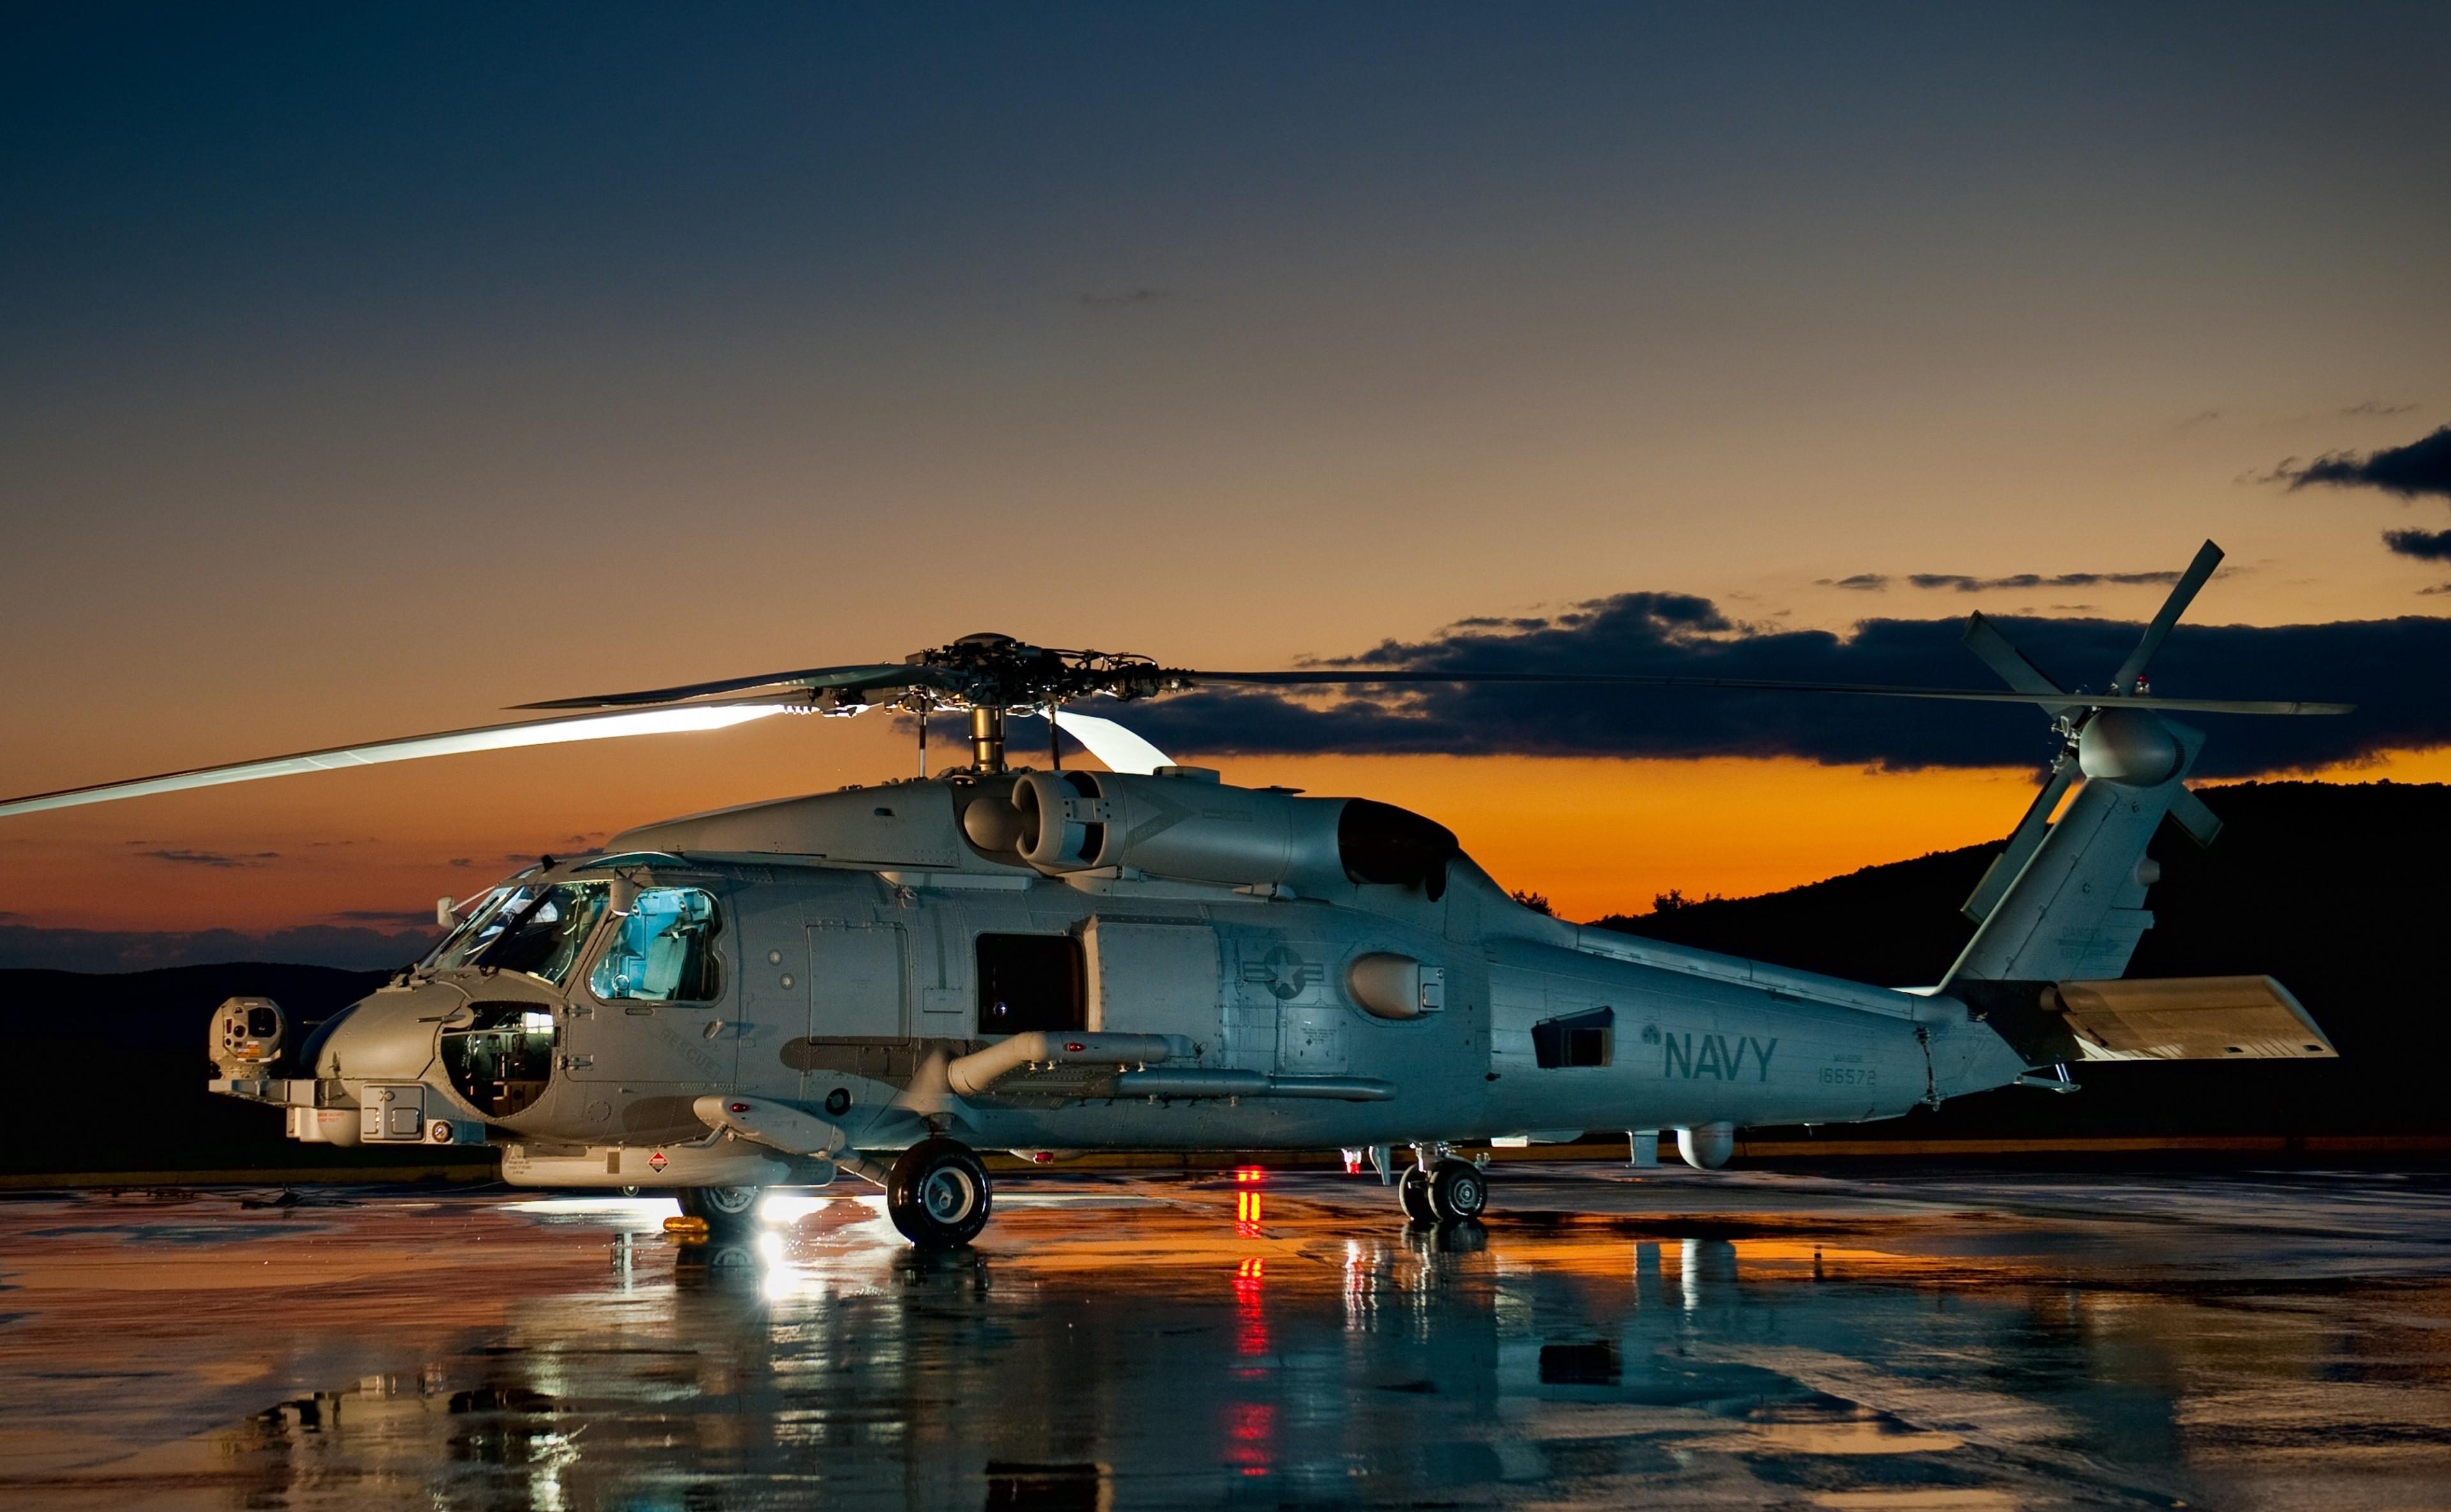 HD wallpaper, American Aircraft, Helicopters, Military Aircraft, Military Vehicle, Dusk, Photography, Sikorsky Aircraft, Aircraft, Military, United States Navy, Vehicle, Sikorsky Mh 60R Seahawk